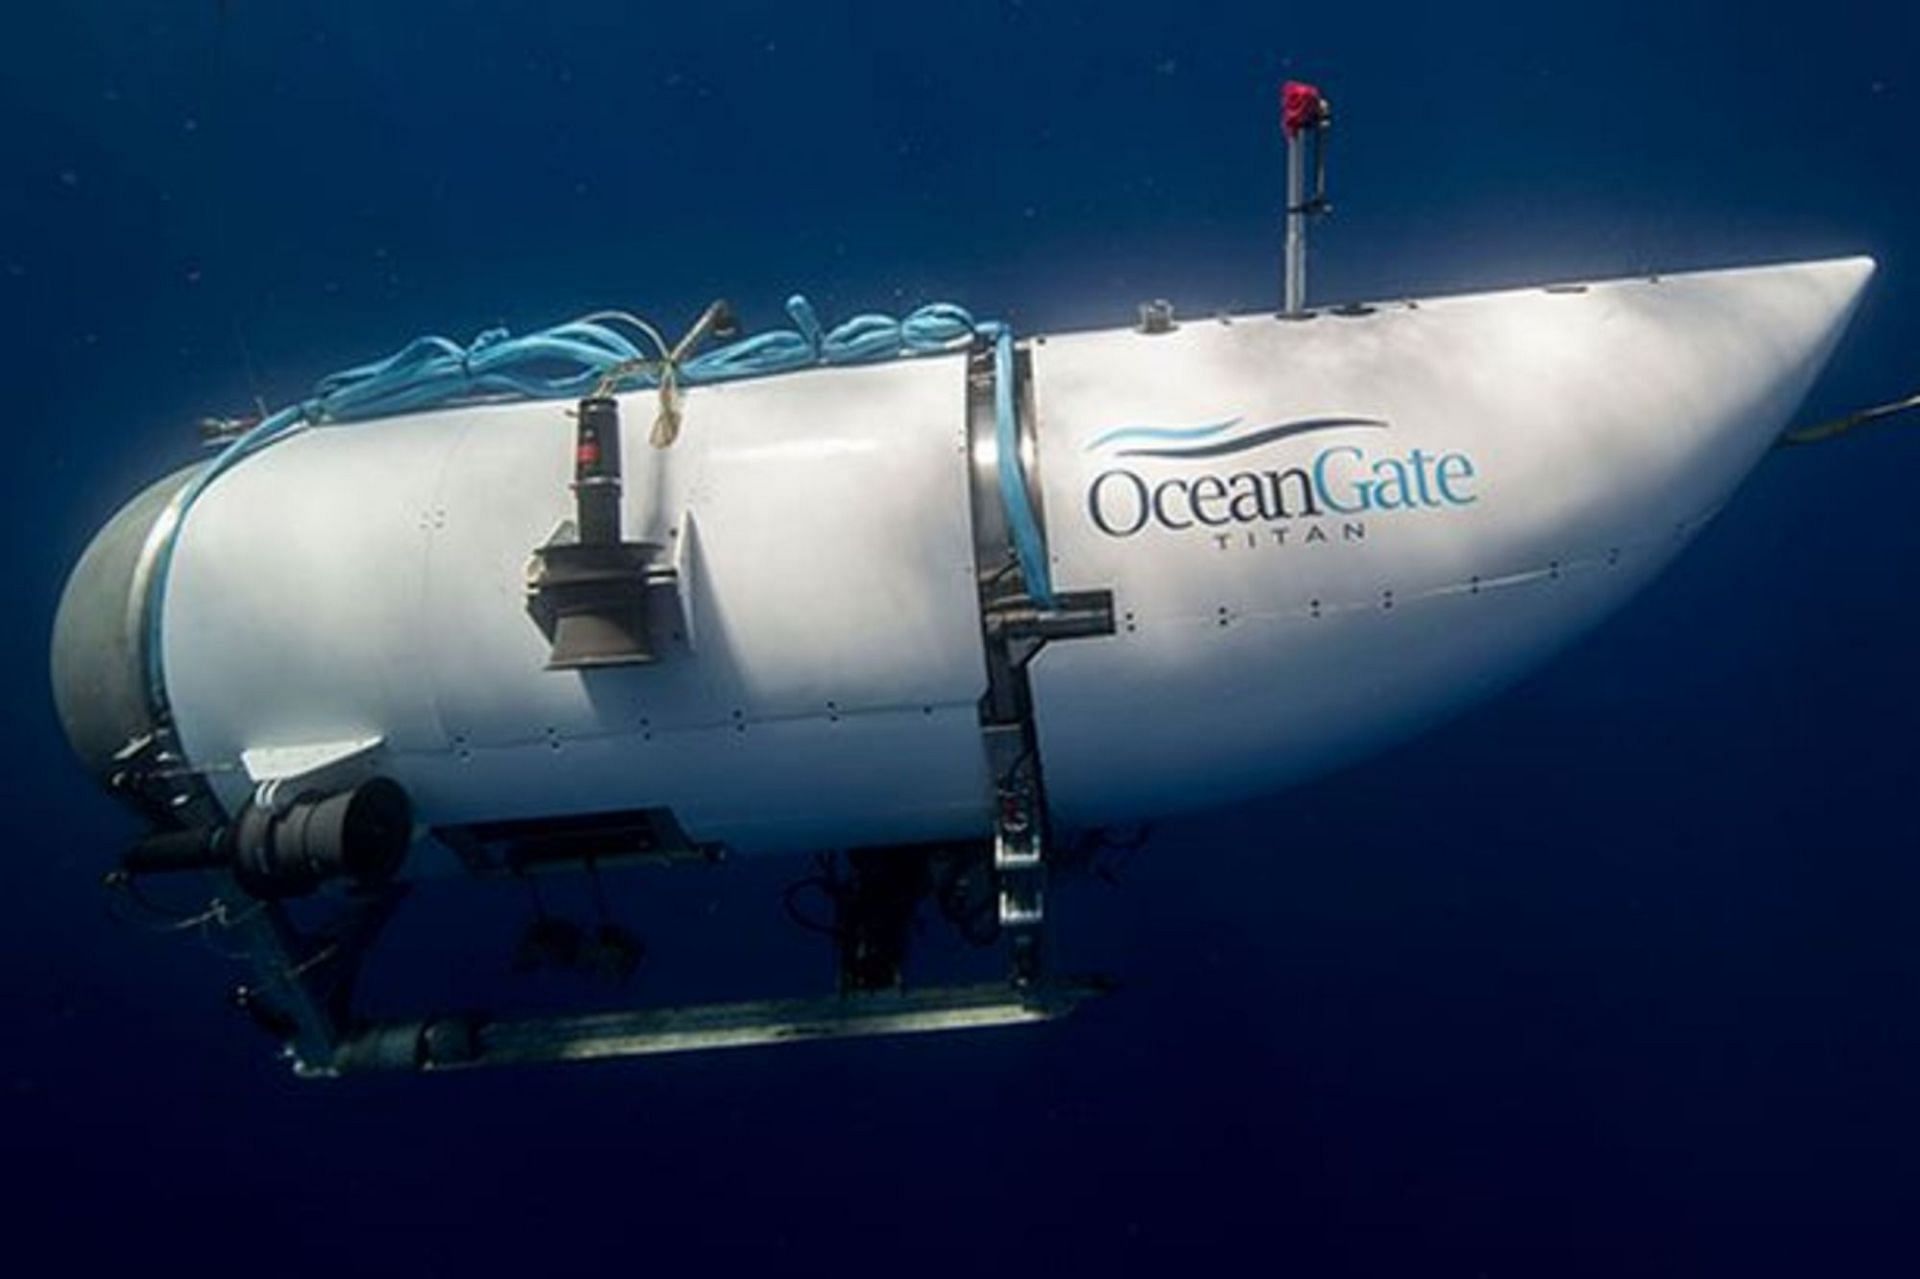 Wild conspiracies take over the internet in light of Titanic bound submarine going missing (Image via OceanGate)